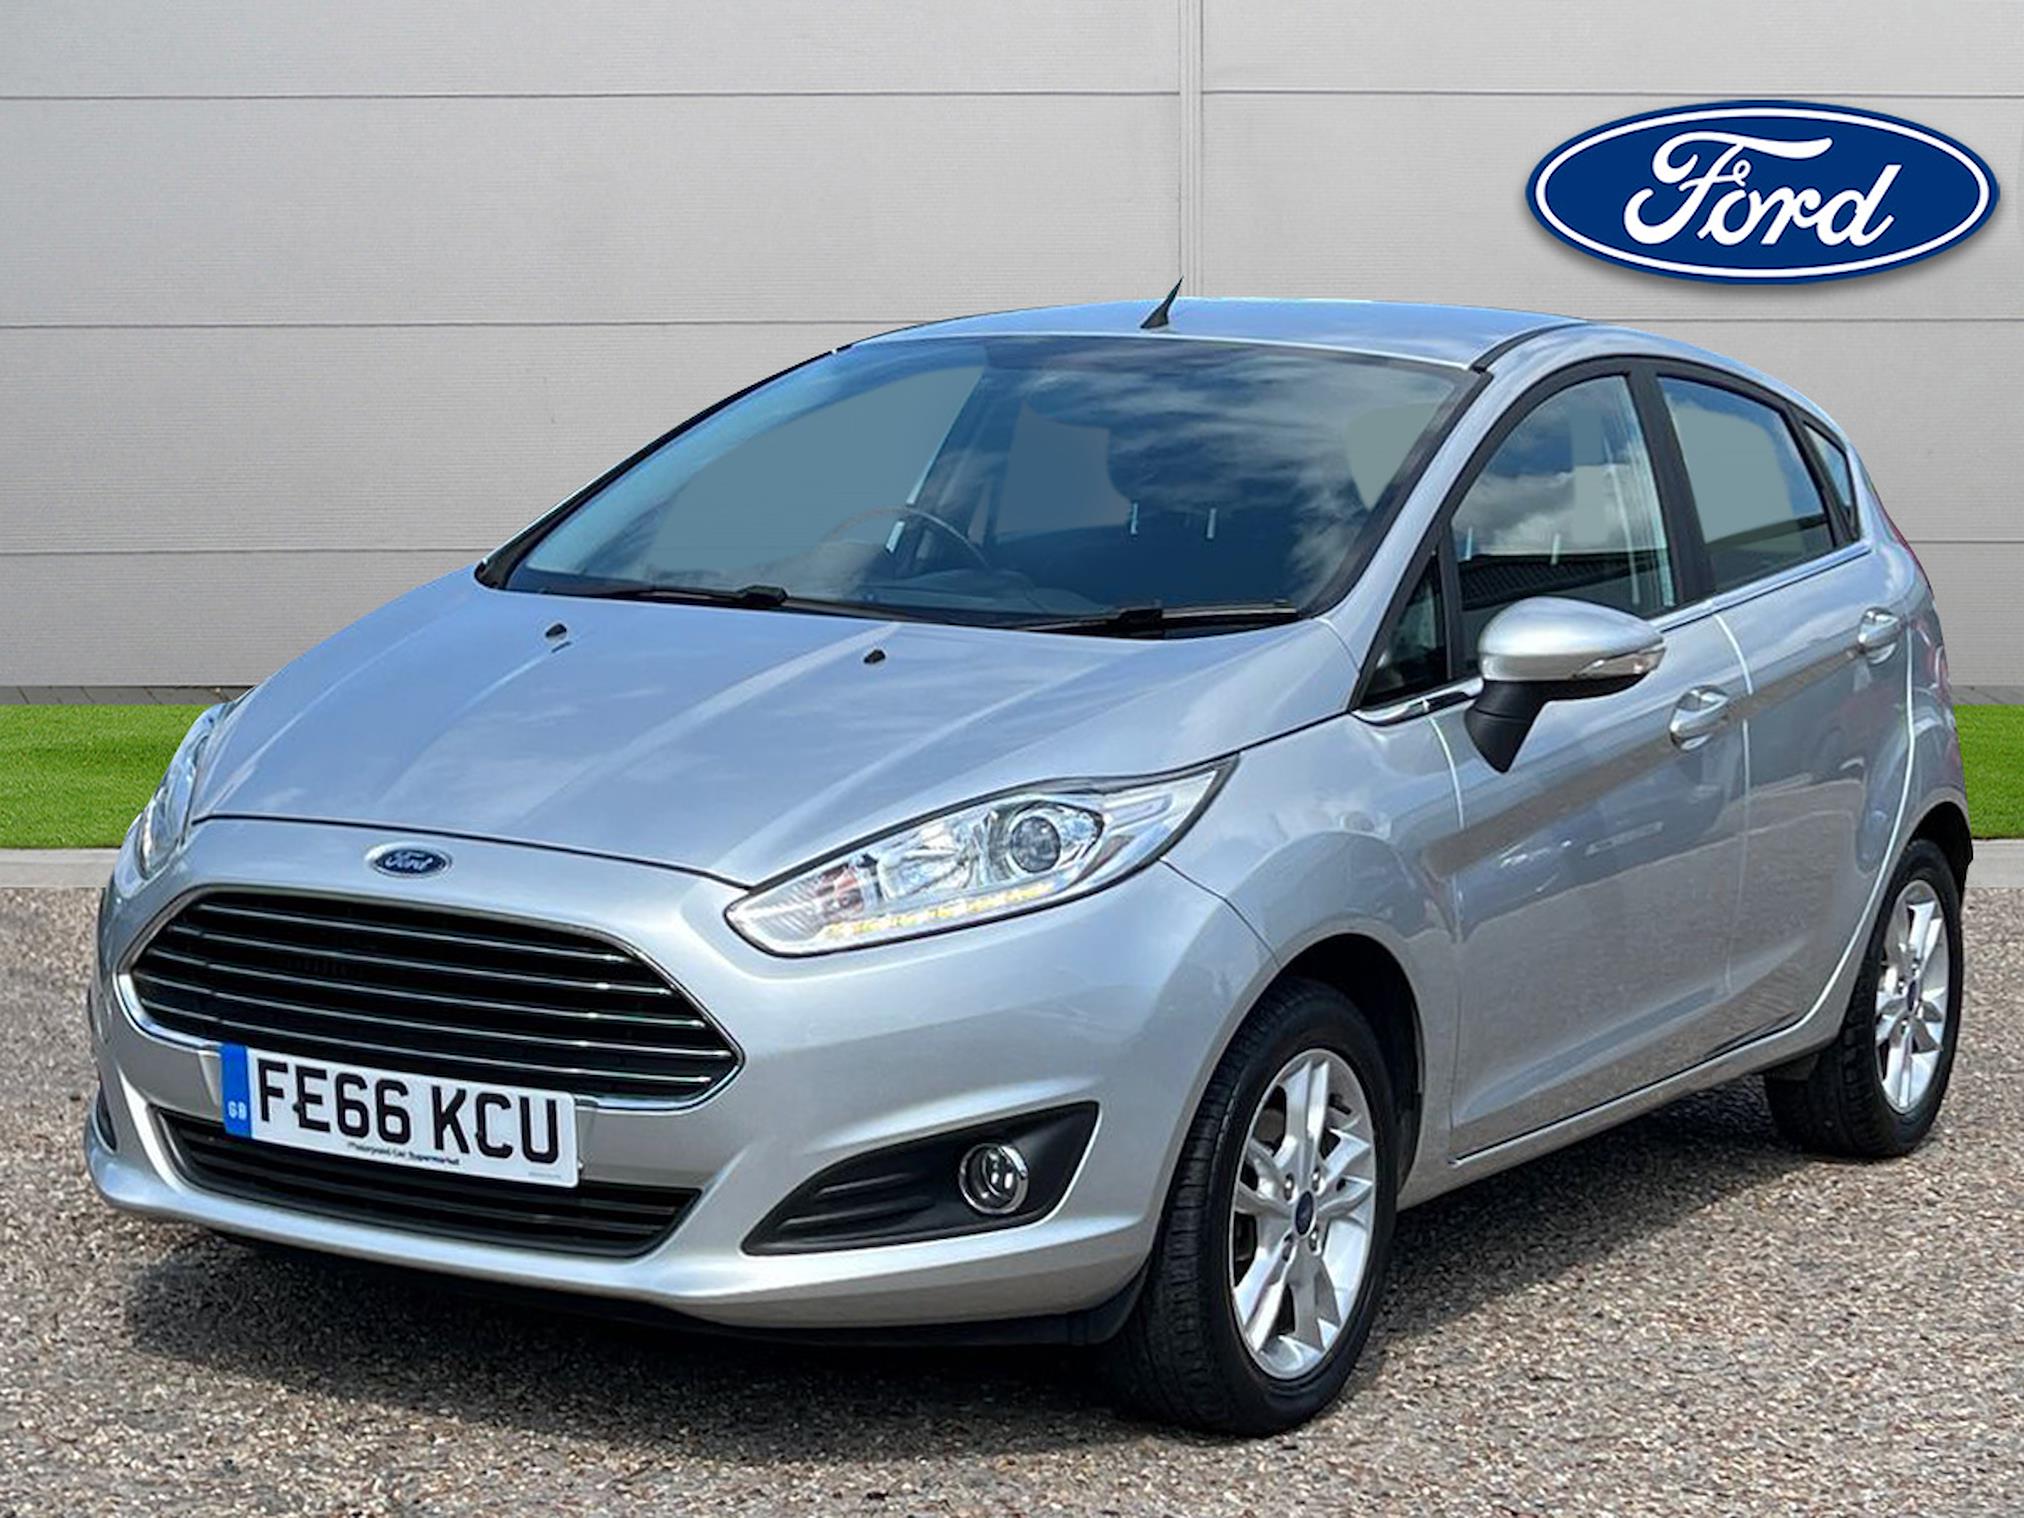 Used FORD FIESTA 1.0 Ecoboost Zetec 5Dr 2016